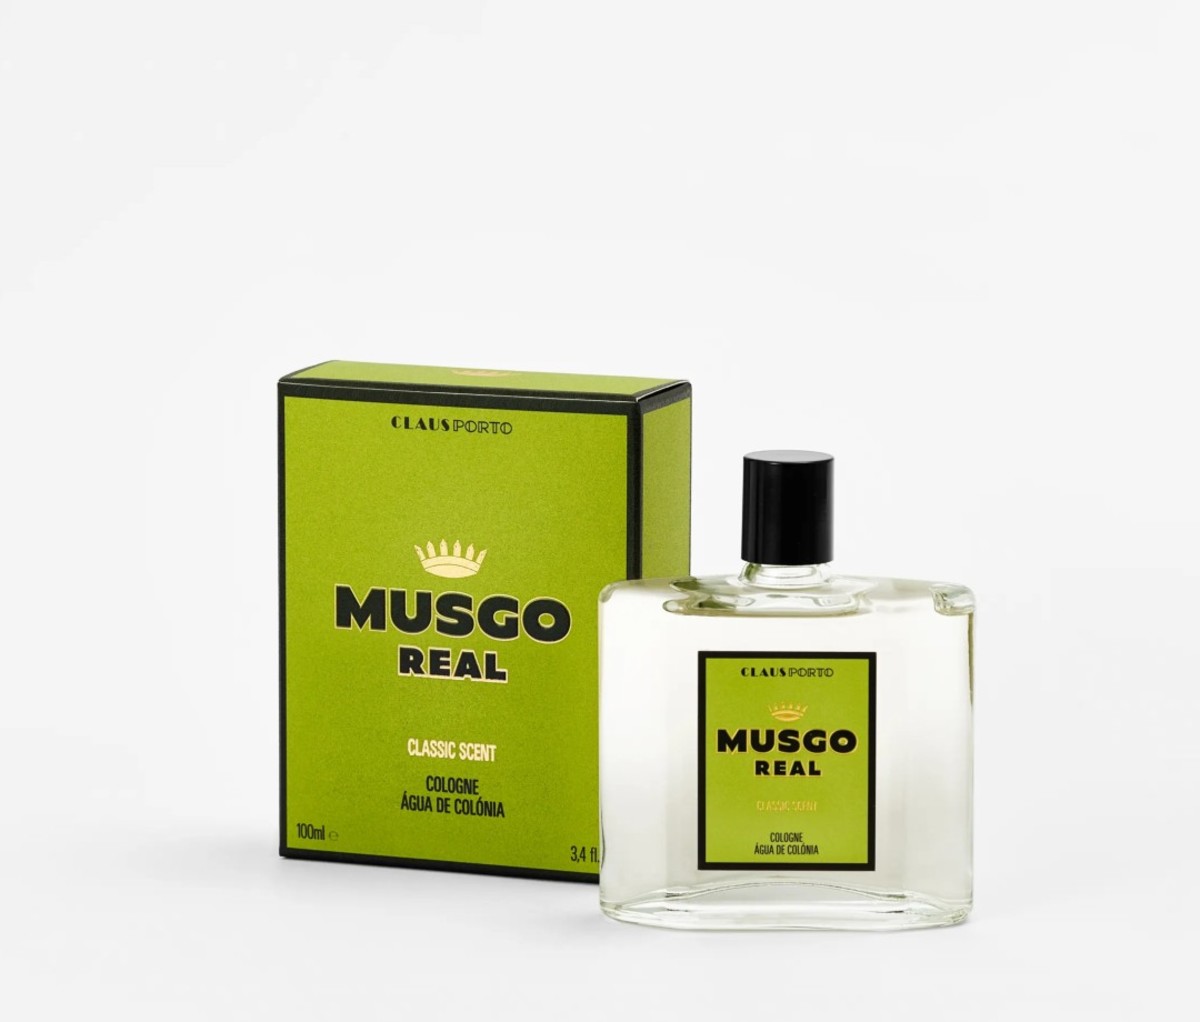 Claus Porto Musgo Real After-Shave Cologne